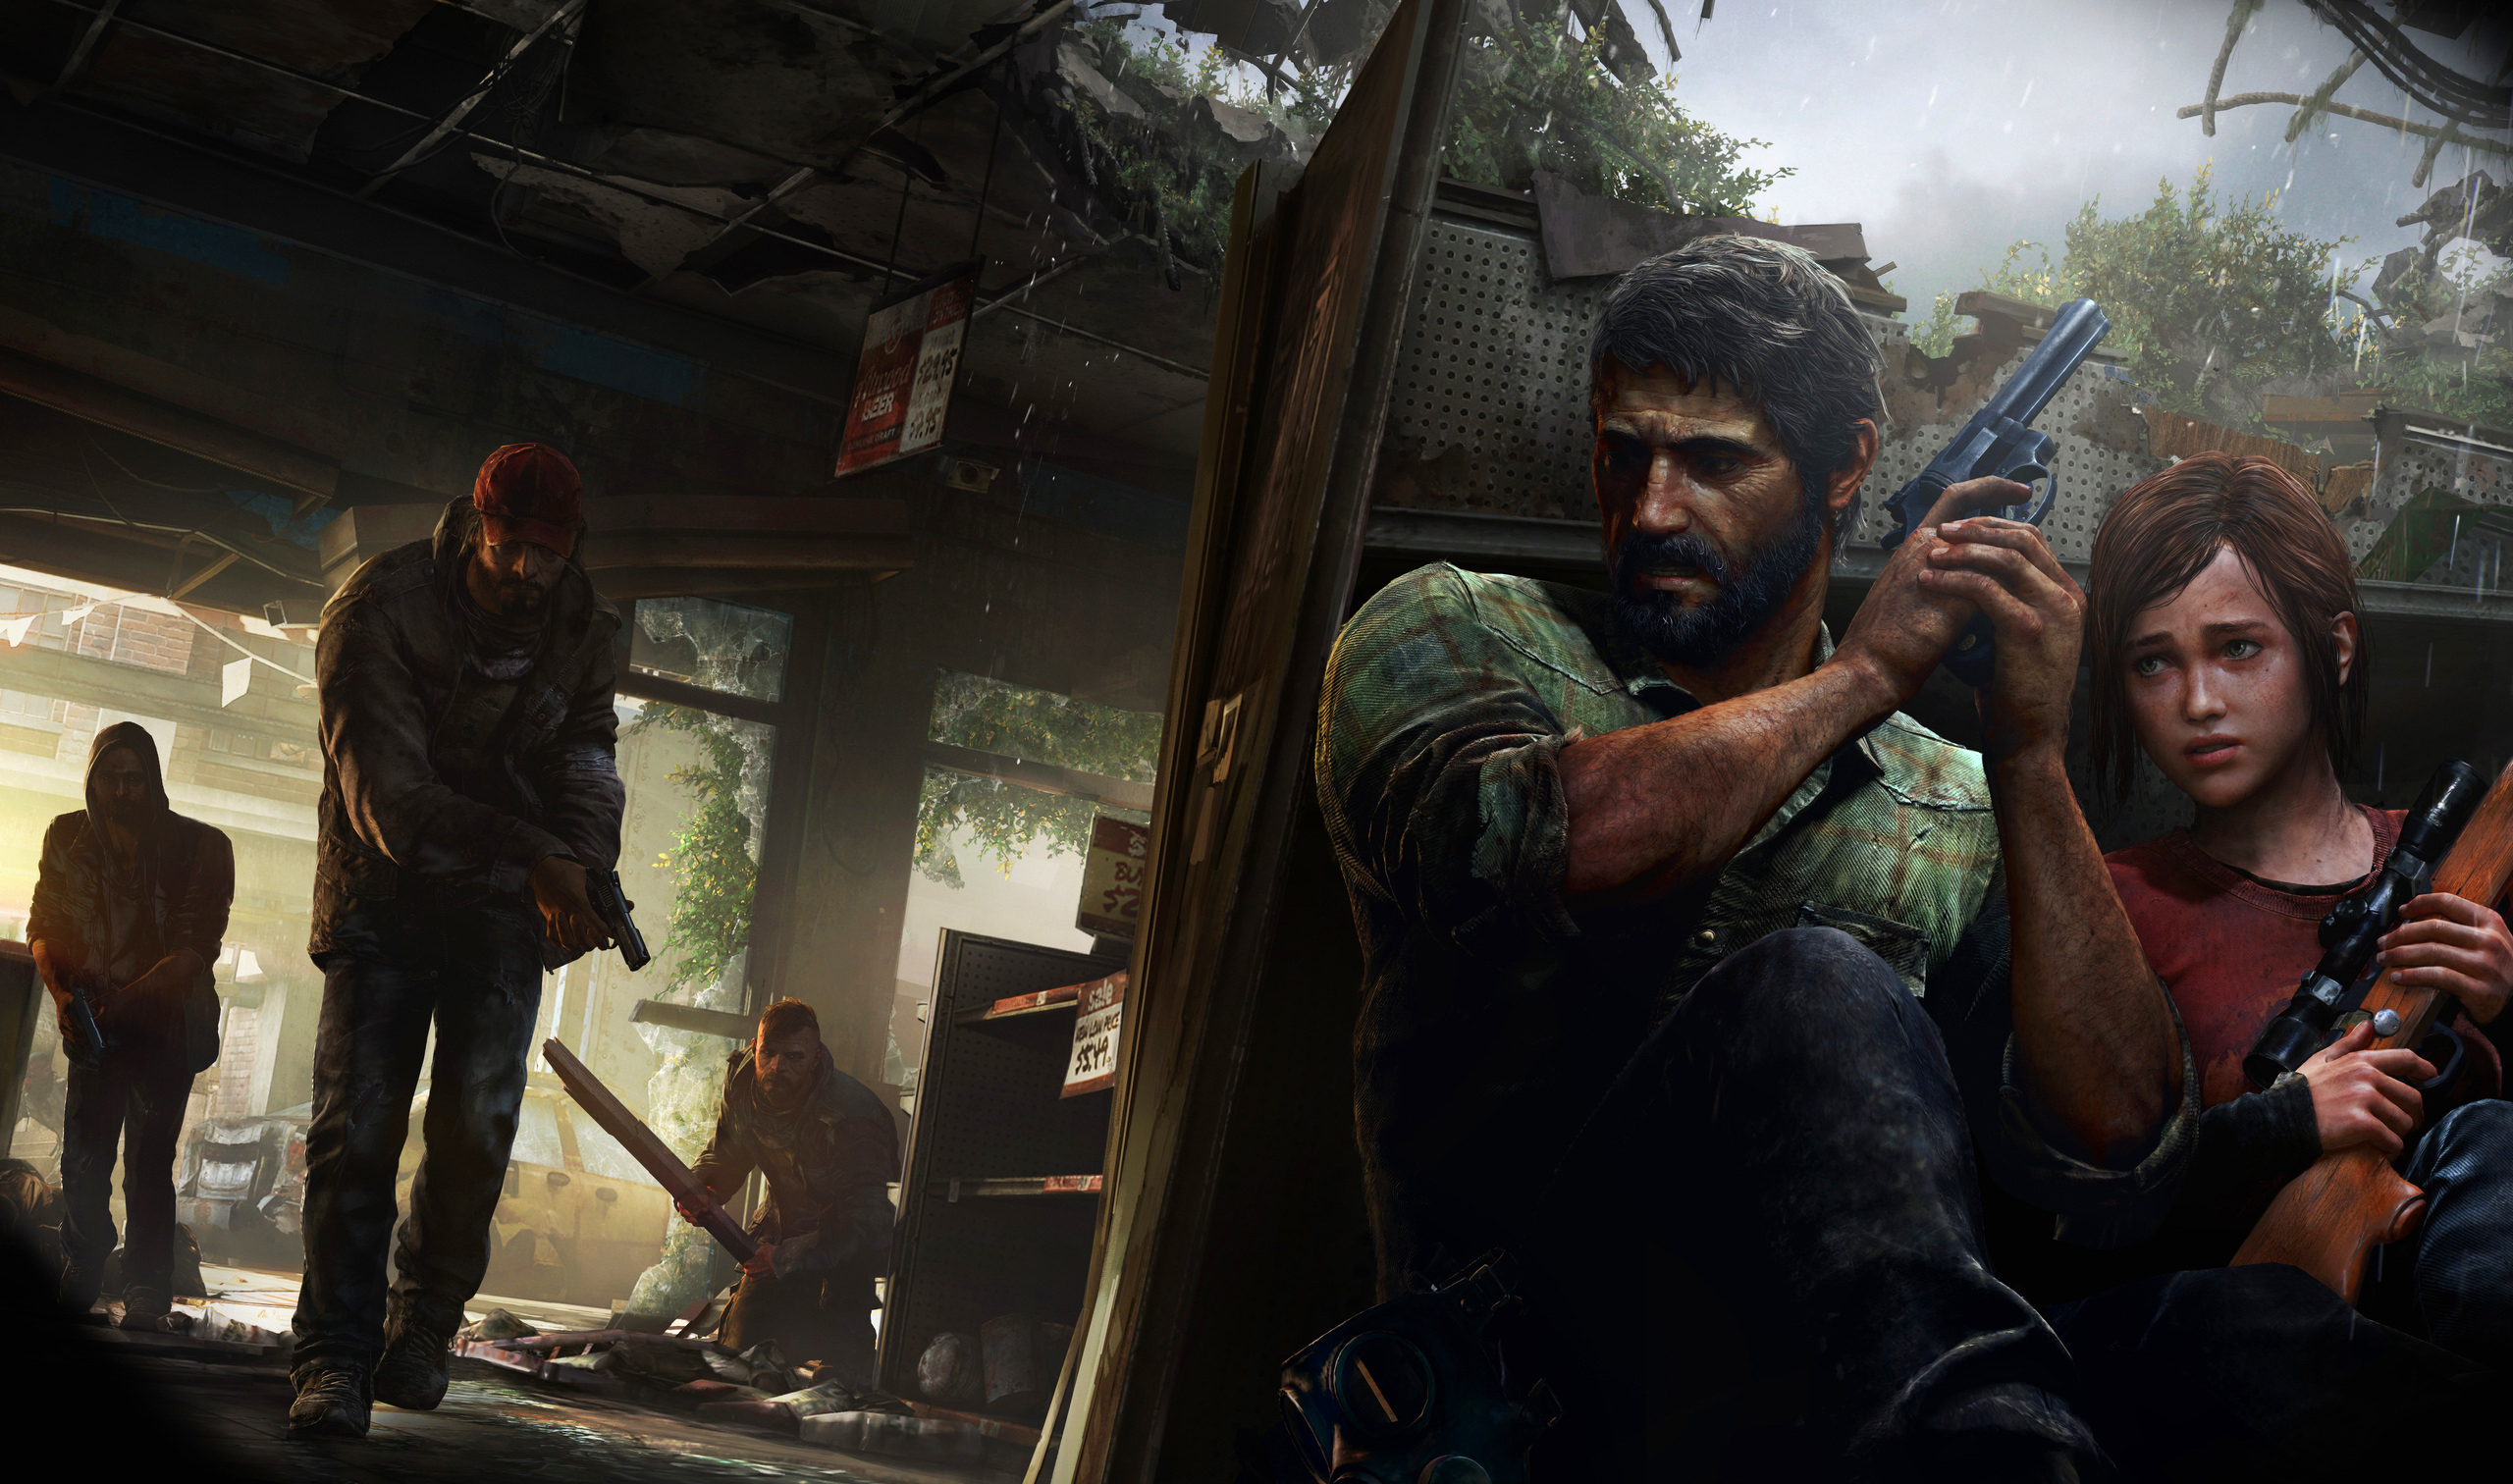 The Last Of Us wallpapers for desktop, download free The Last Of Us  pictures and backgrounds for PC